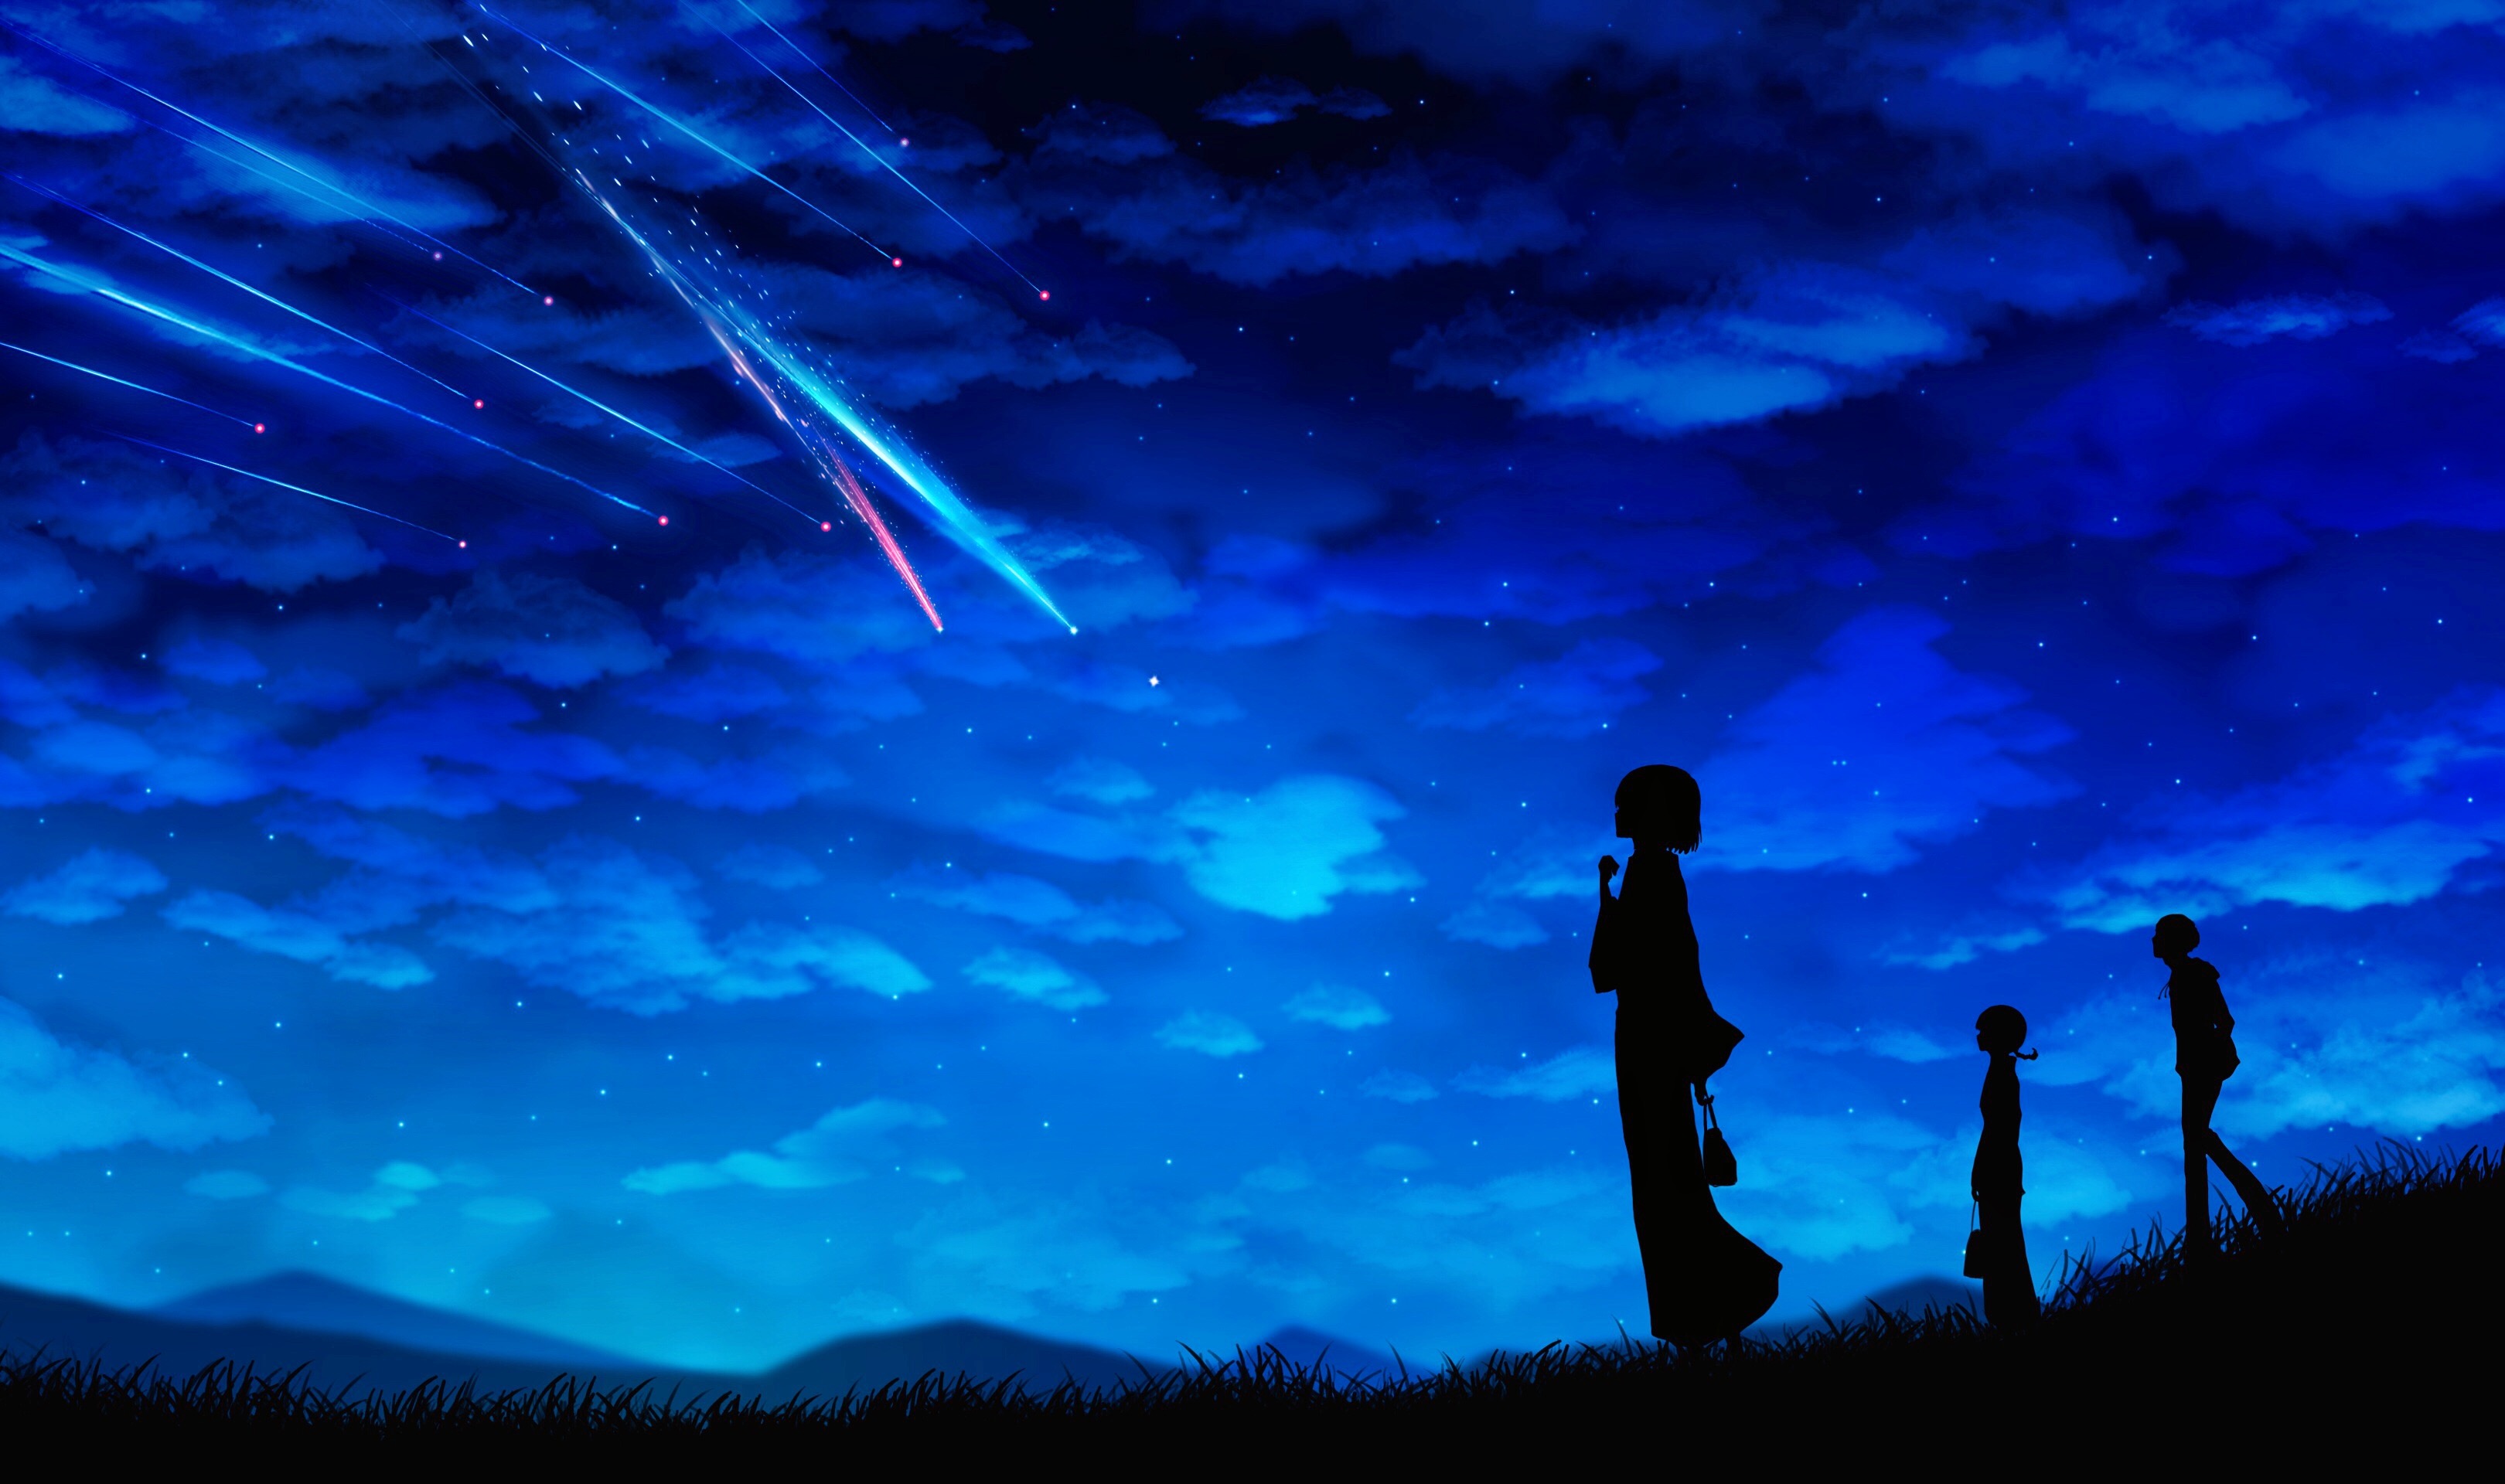 Your Name. HD Wallpaper | Background Image | 3240x1920 | ID:743977 - Wallpaper Abyss